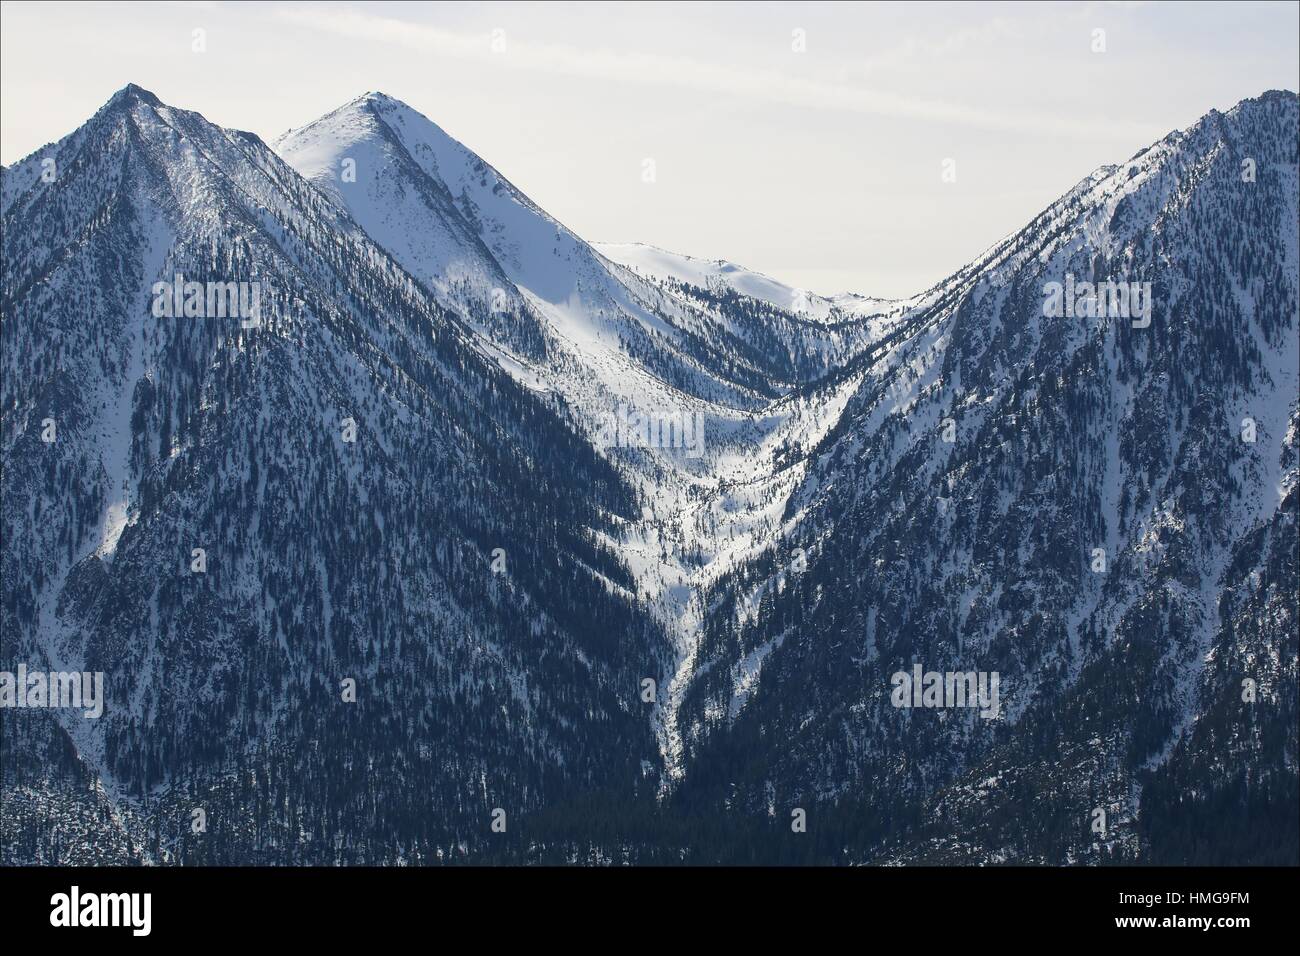 The eastern side of the Sierra Nevada mountains in the Carson Valley, near Genoa, Nevada, wear a winter coat of snow, USA Stock Photo